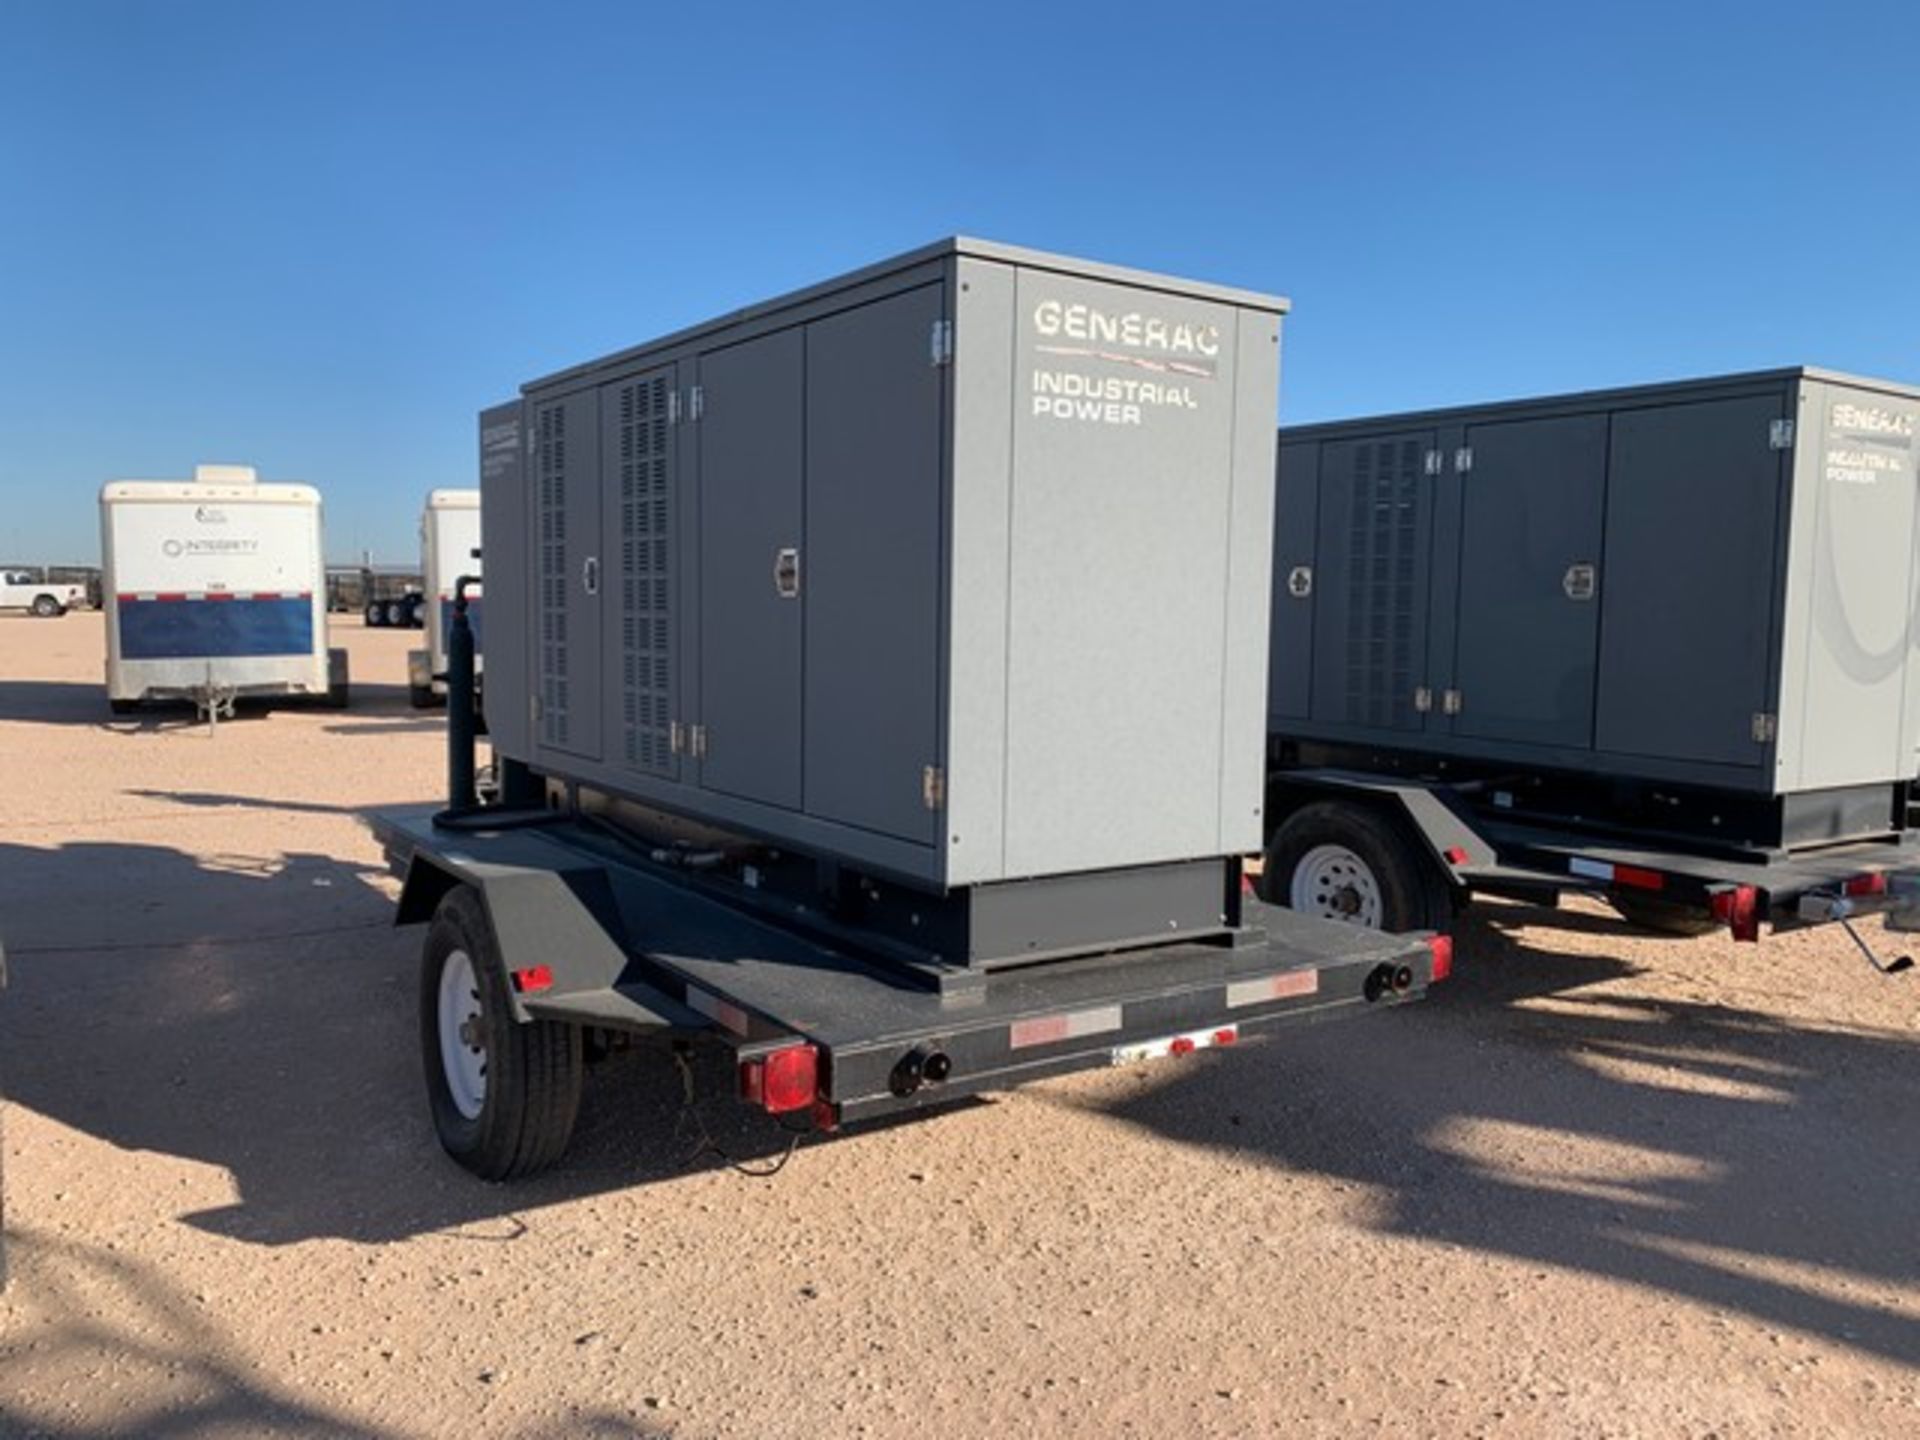 Located in YARD 1 - Midland, TX (2939) 2013 GENERAC INDUSTRIAL POWER 130 KW, 277/480V 3 PHASE - Image 4 of 4